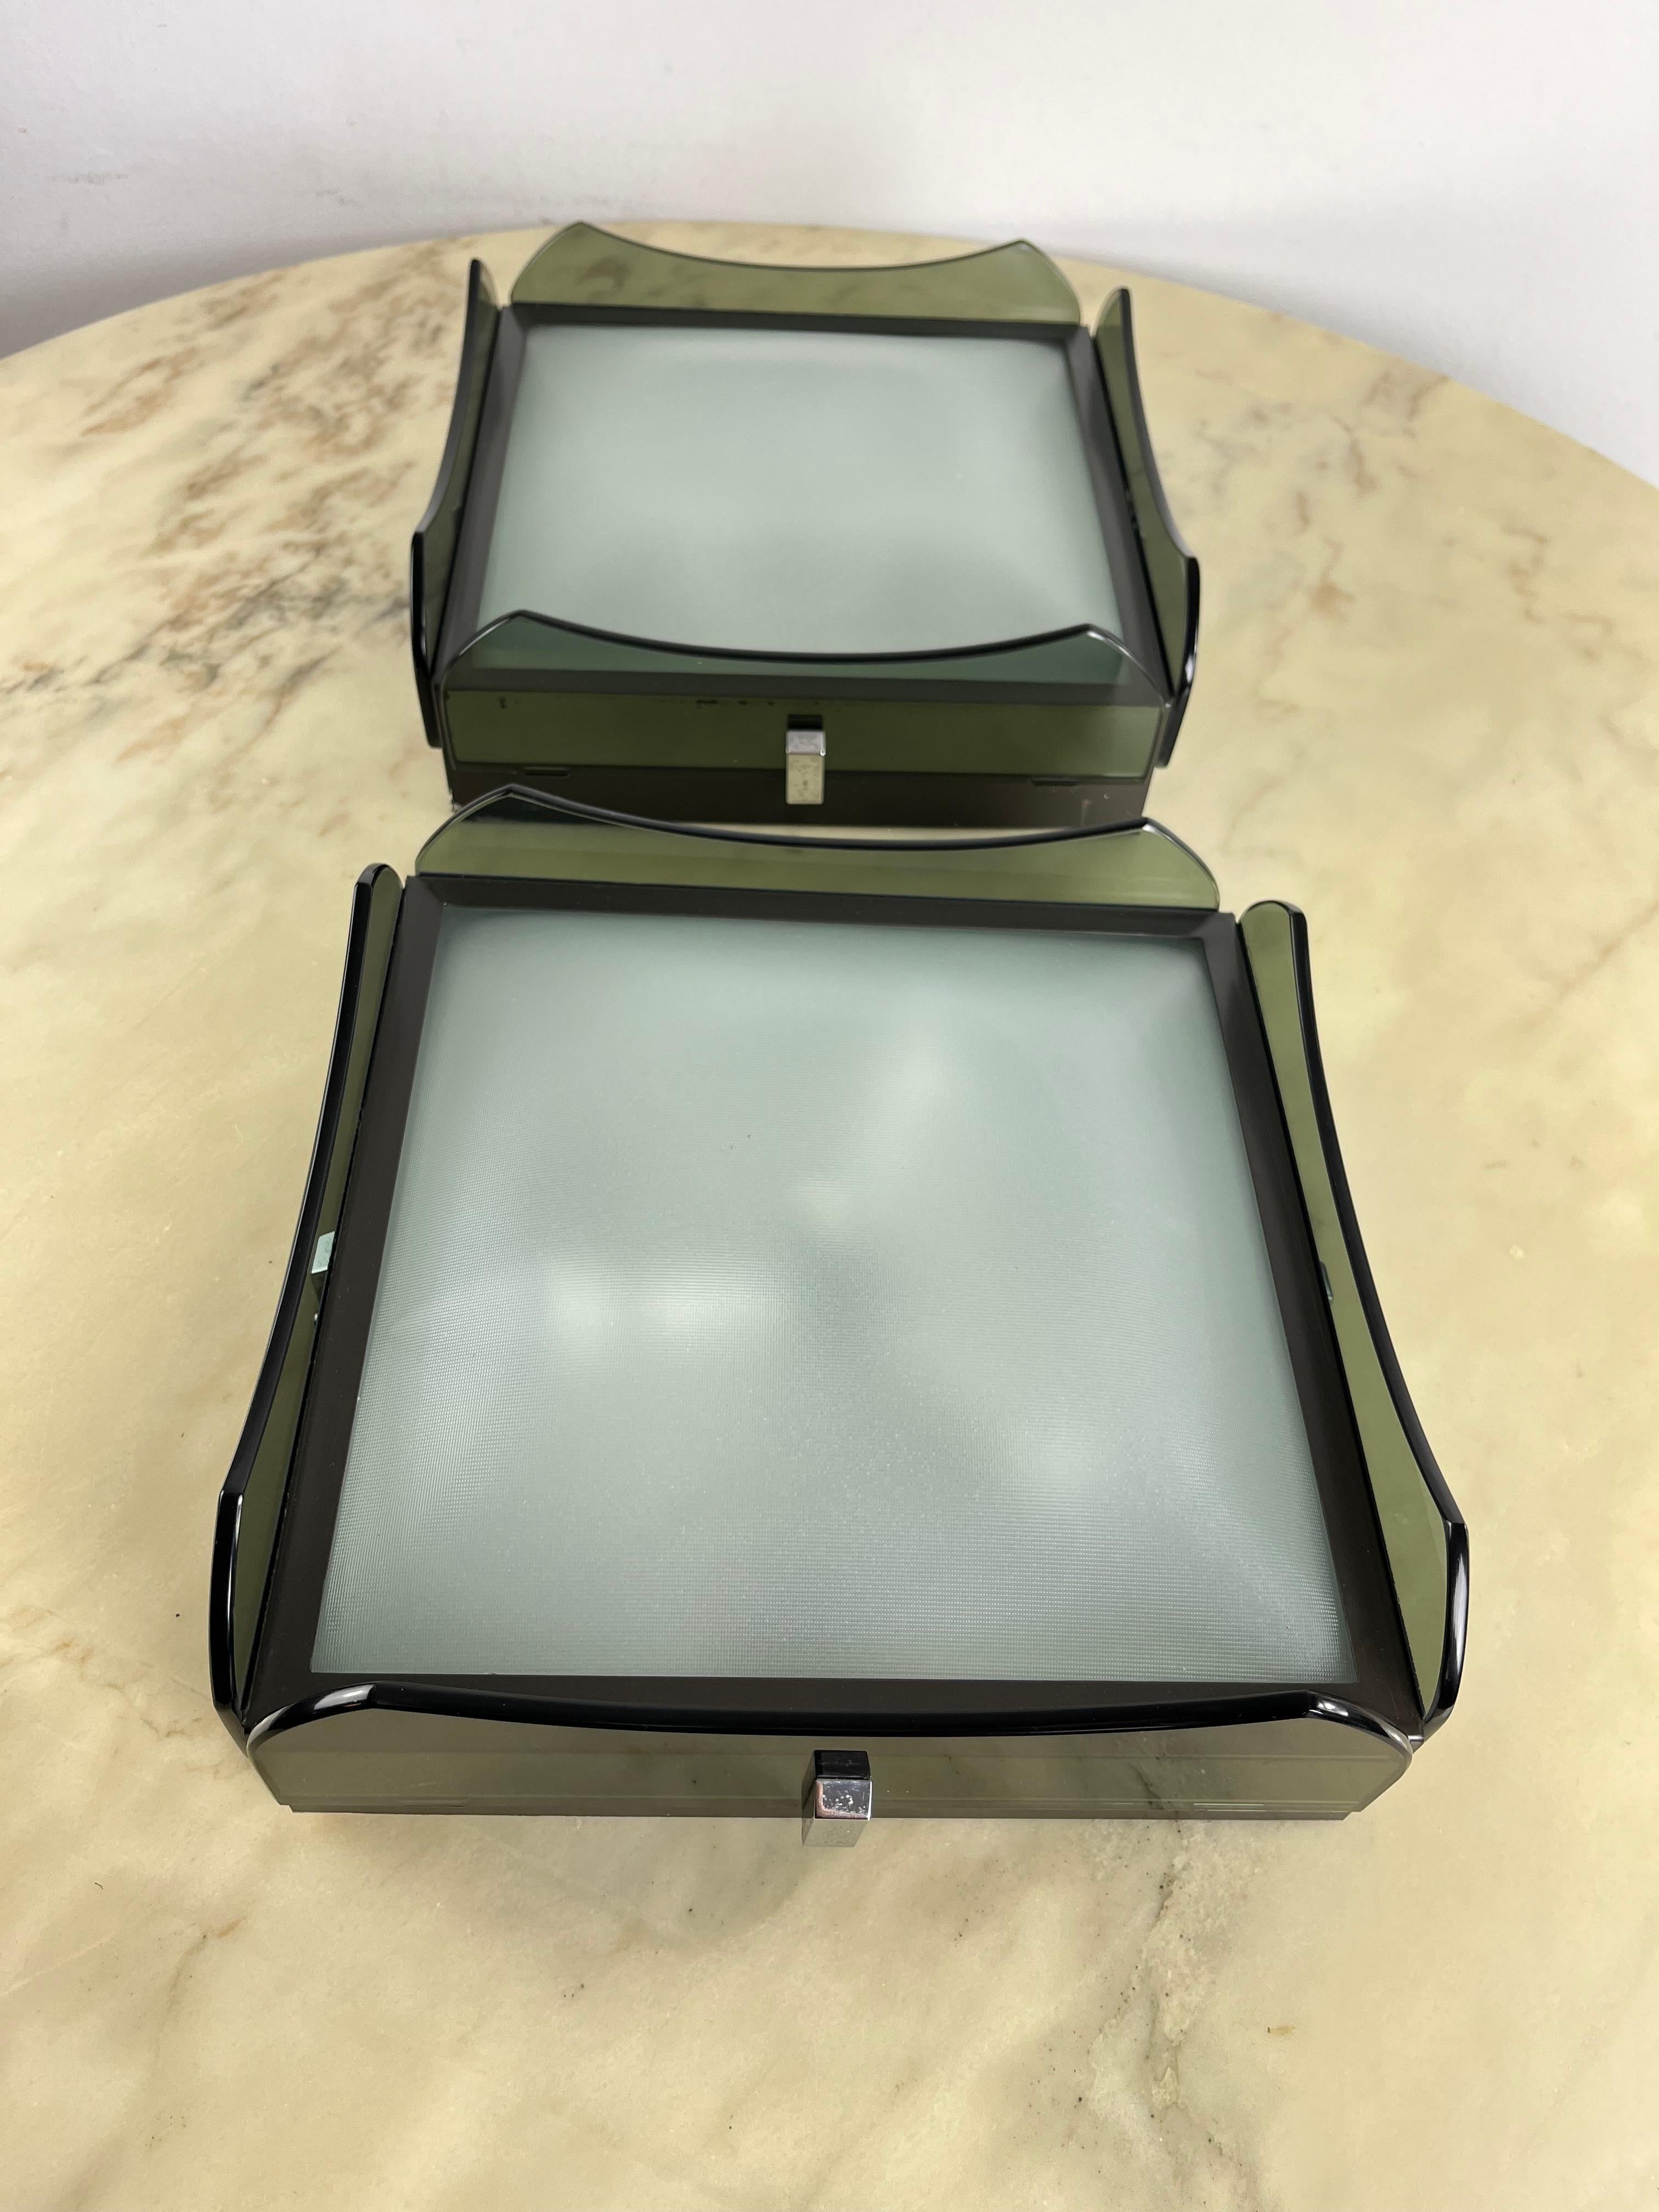 Set of 2 Mid-Century glass ceiling lights, Italian design Veca 1960s
Nile green glass, metal structure with 3 E14 lamp holders.
Intact and in good condition, small signs of aging.

We guarantee adequate packaging and will ship via DHL, insuring the